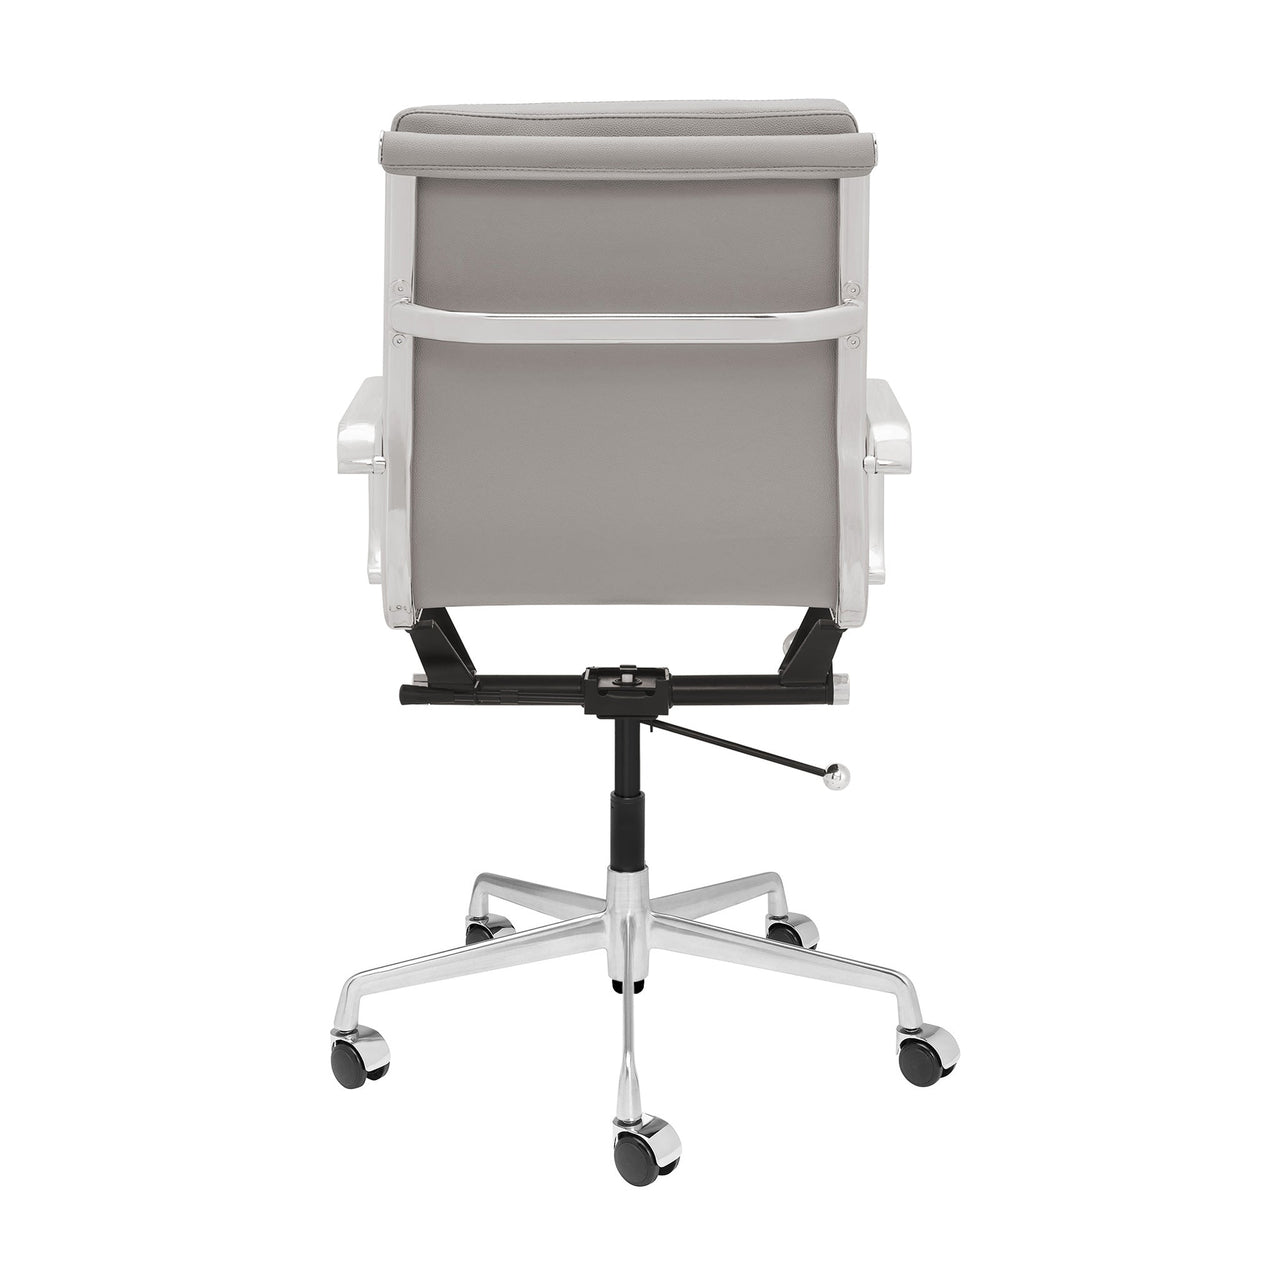 Classic SOHO Soft Padded Management Chair (Grey)